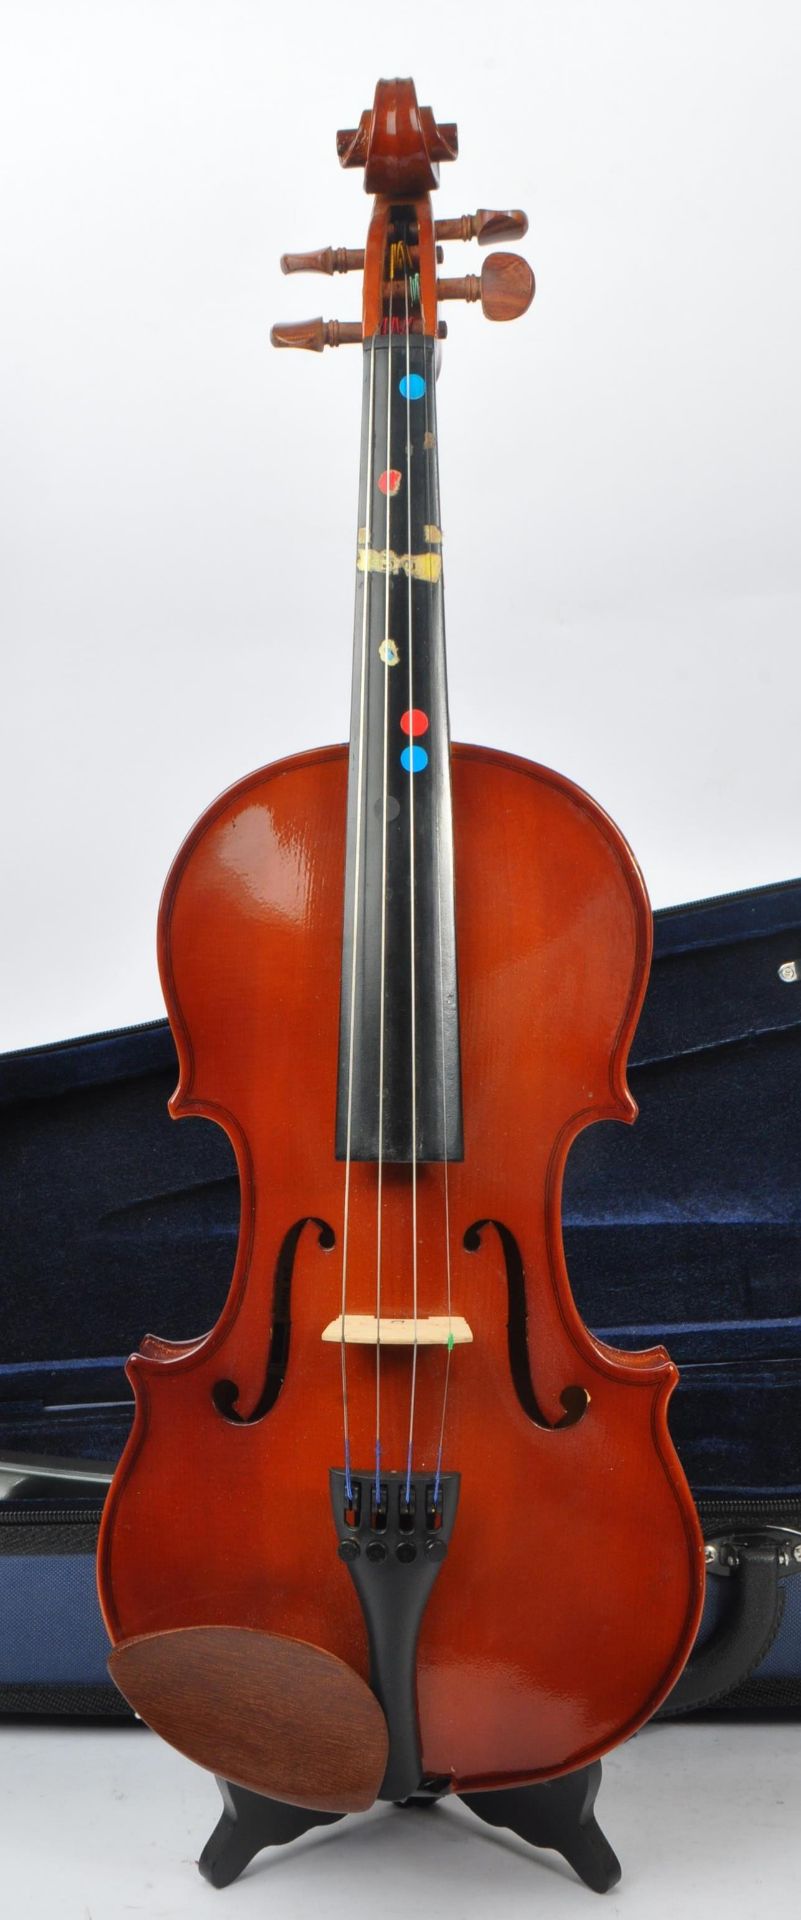 PRIMAVERA - 3/4 SIZE STUDENT VIOLIN WITH BOW & CASE - Image 2 of 5